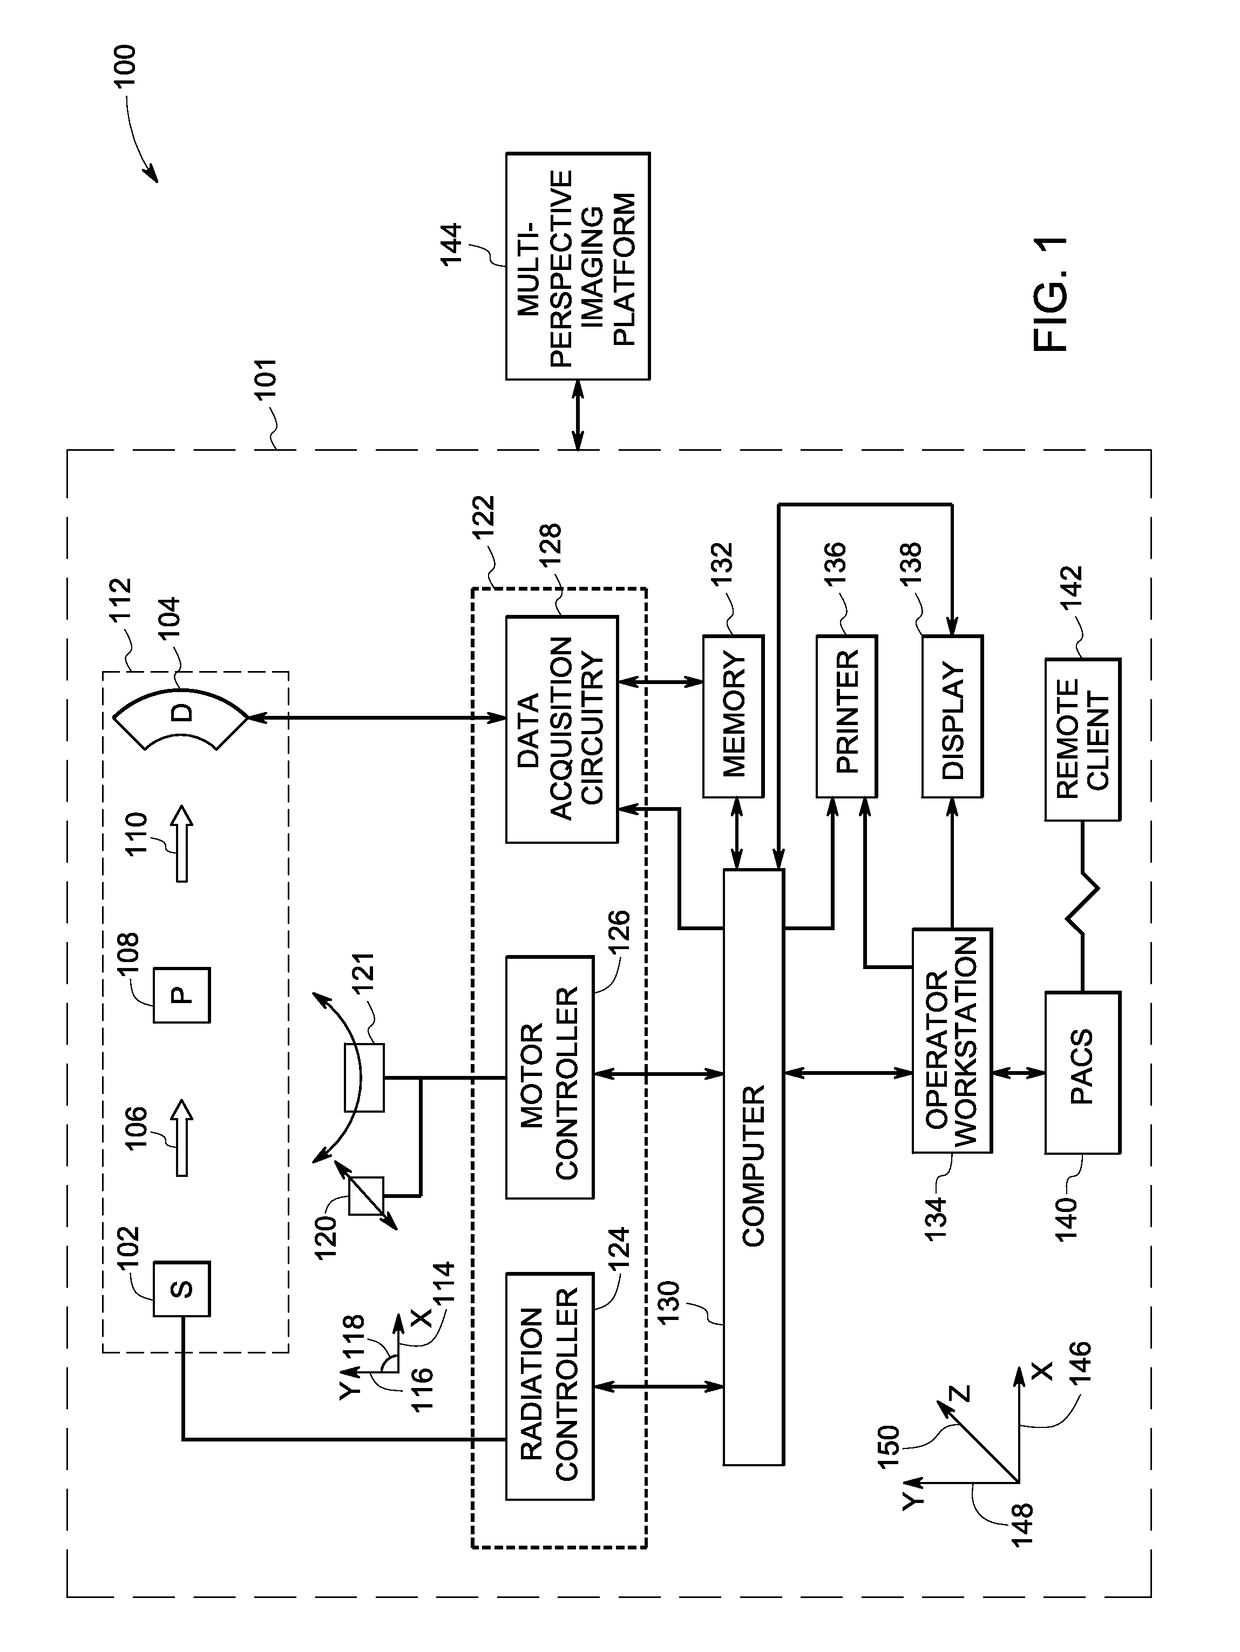 Multi-perspective interventional imaging using a single imaging system